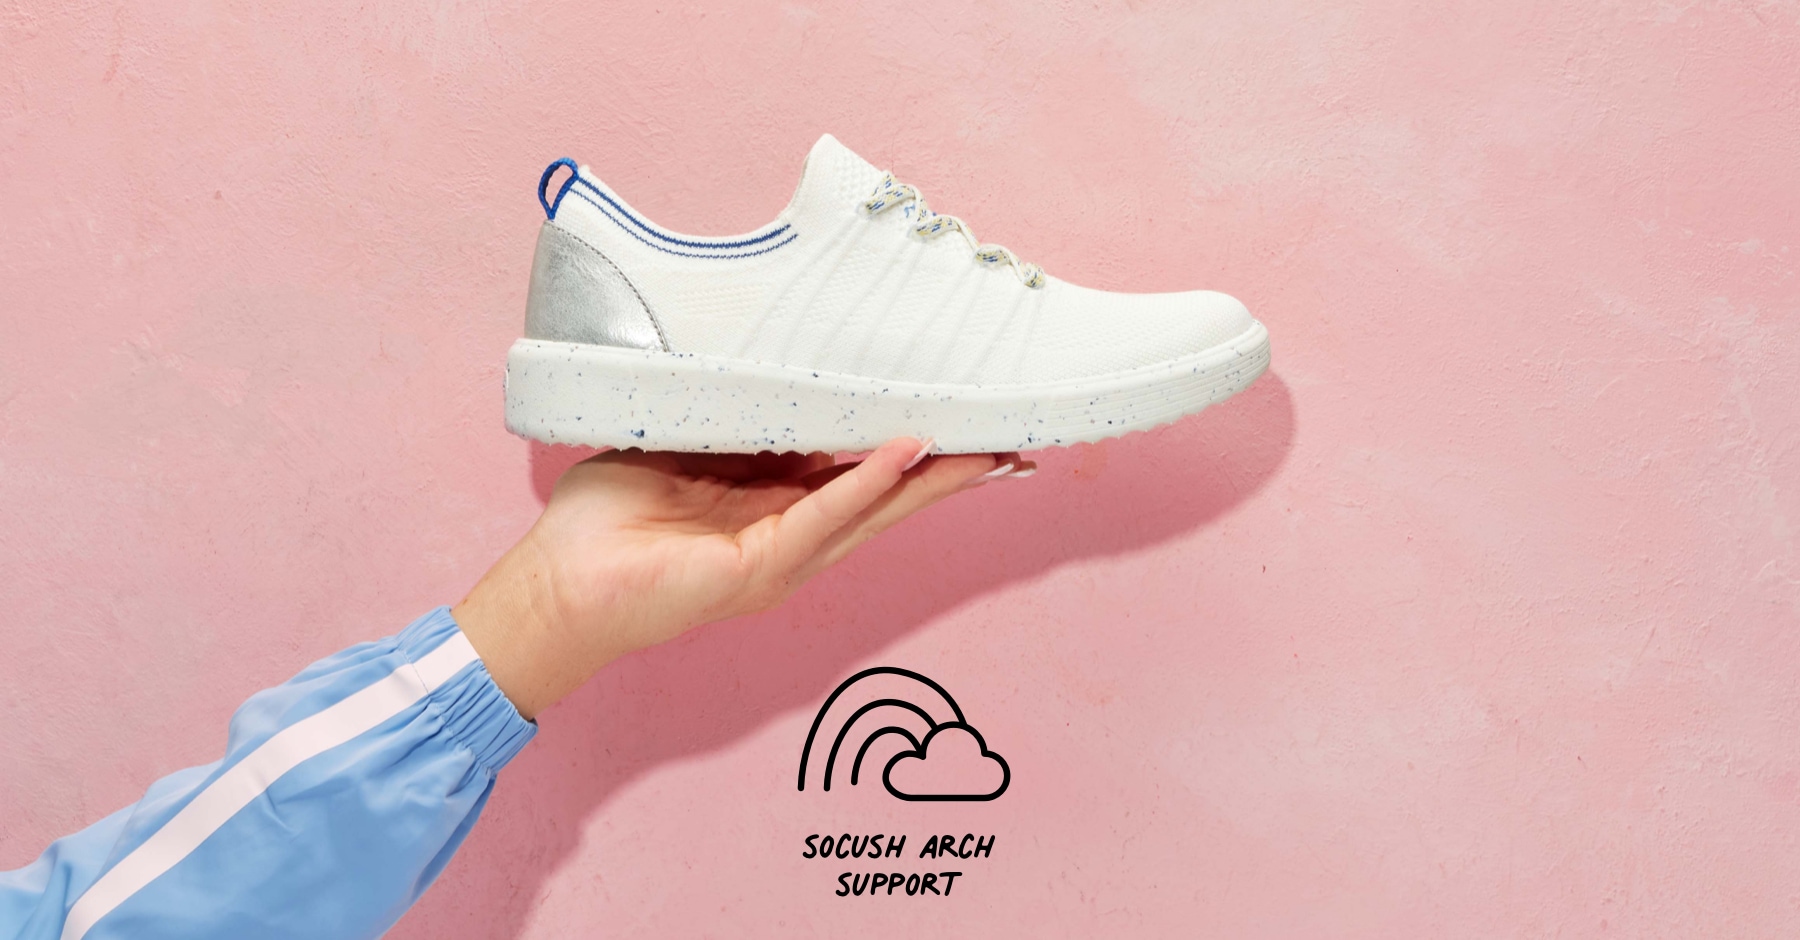 shoes with socush arch support